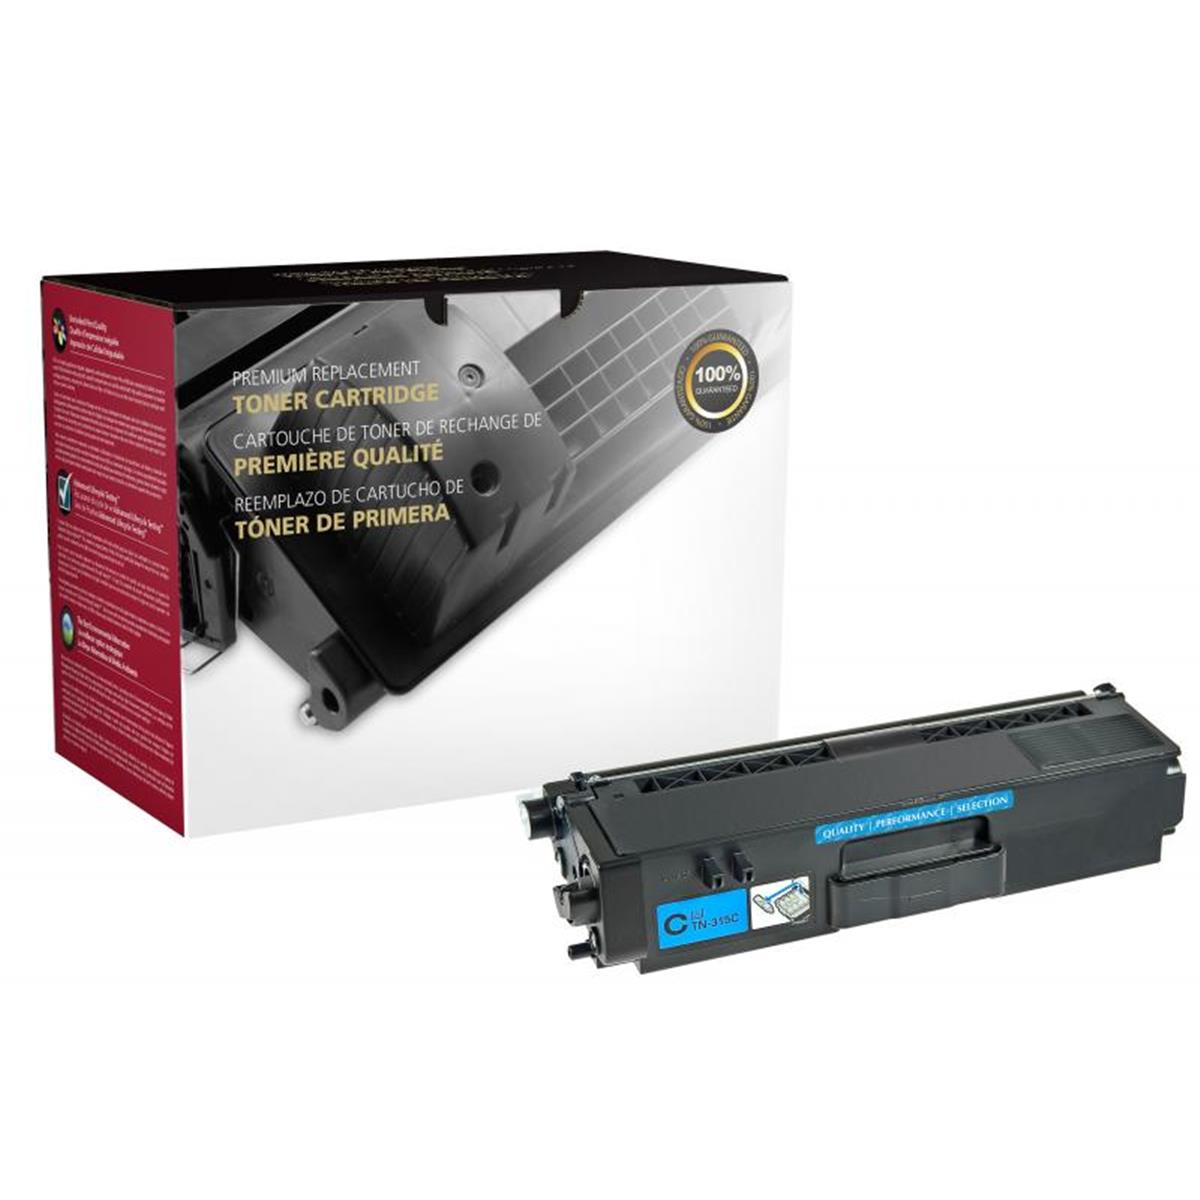 Picture of Brother 200593 Cyan Toner Cartridge for TN310